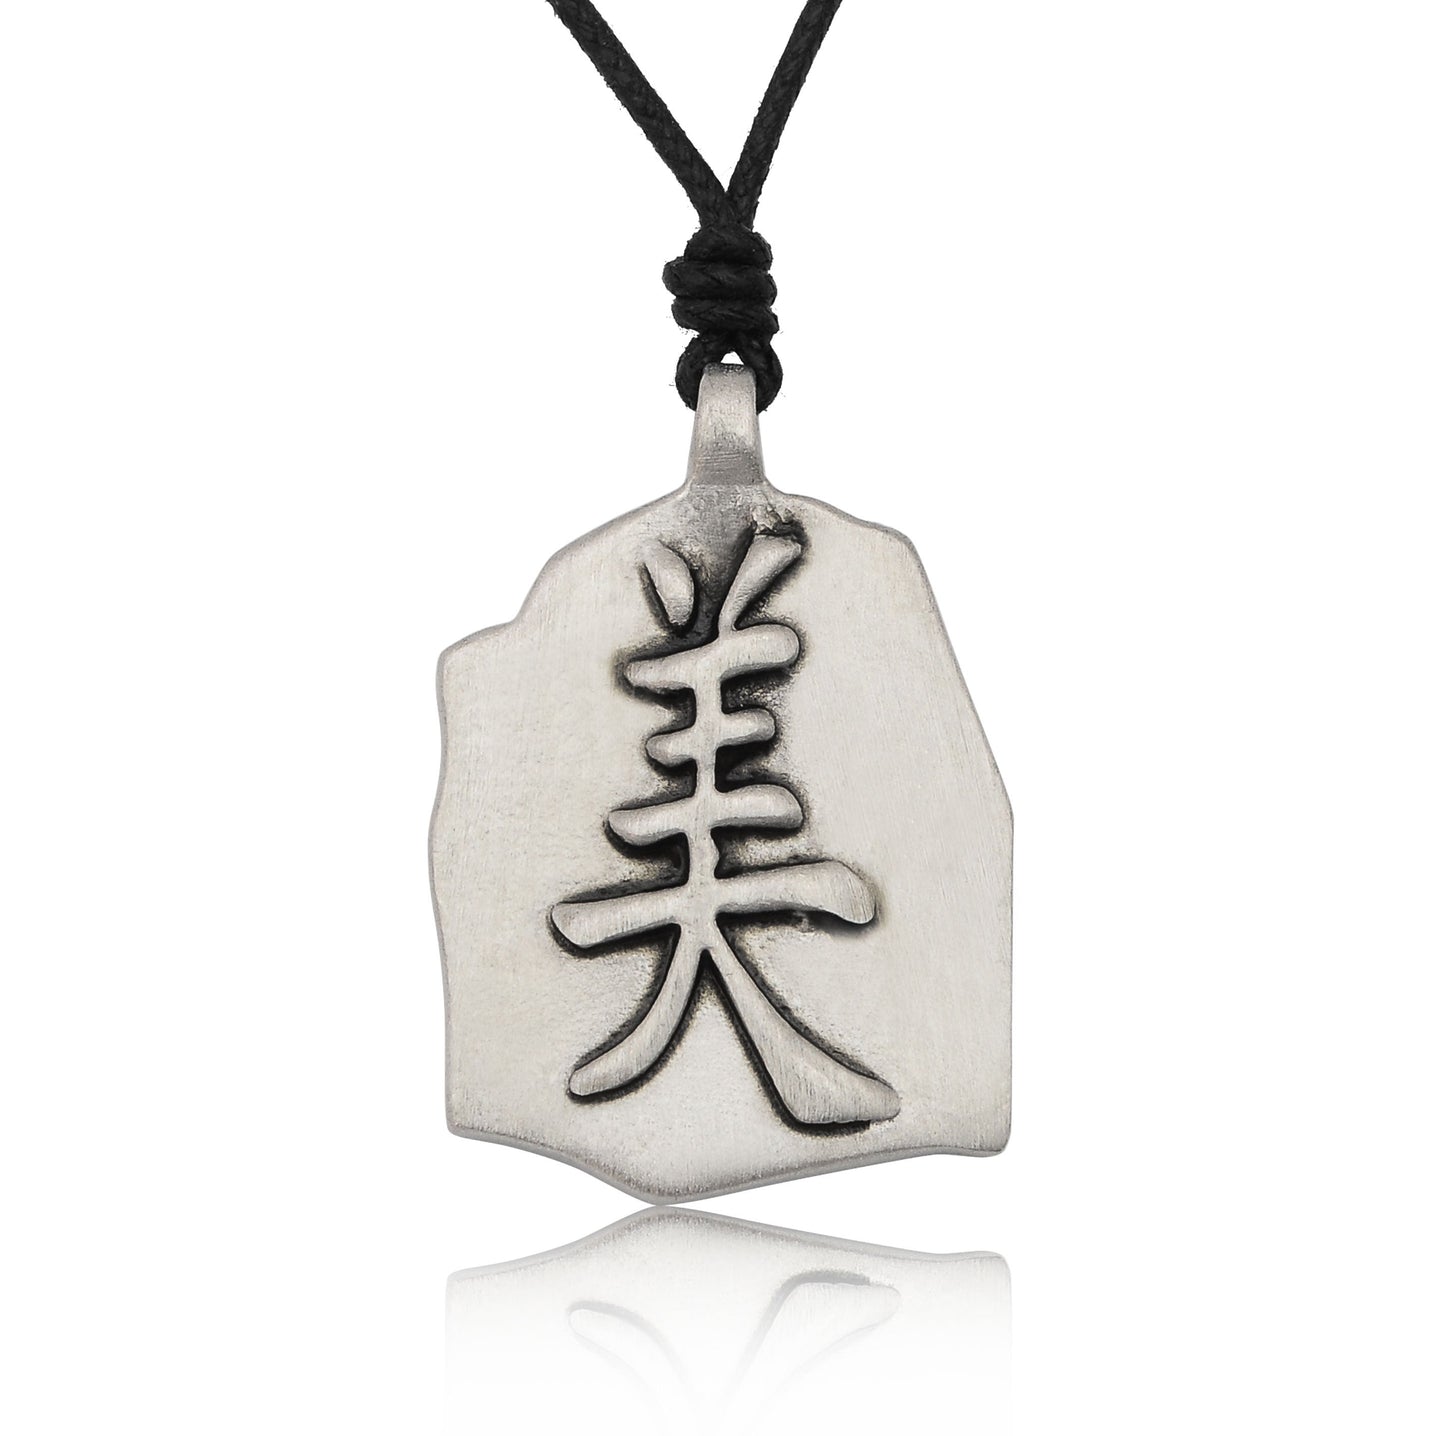 Chinese Word Love Silver Pewter Charm Necklace Pendant Jewelry